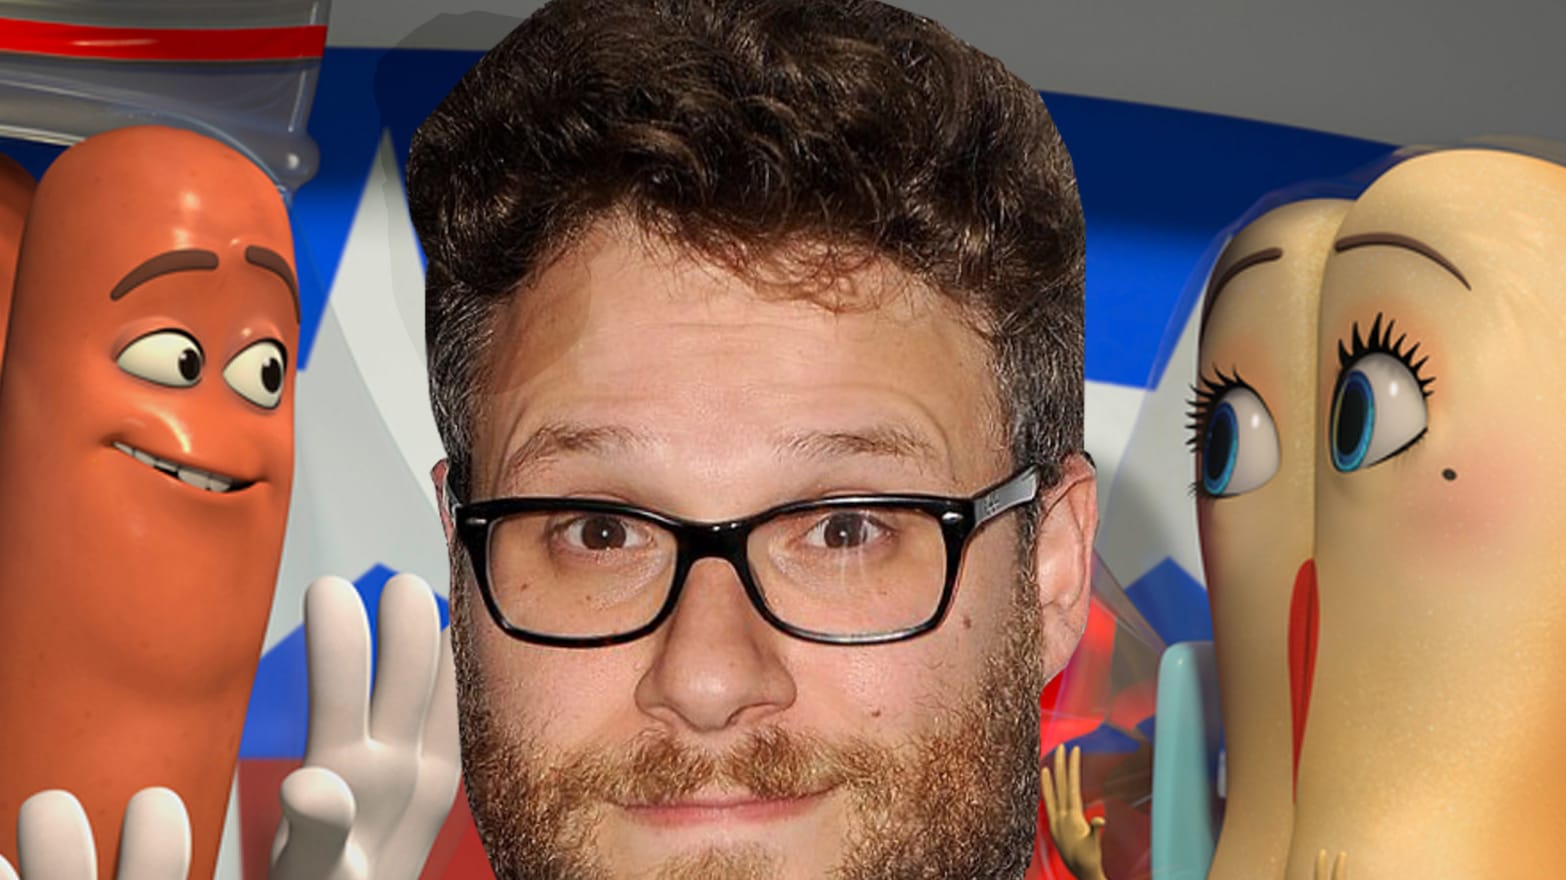 Seth Rogen On The Insane ‘sausage Party’ Orgy And Almost Performing At Kanye And Kim’s Wedding